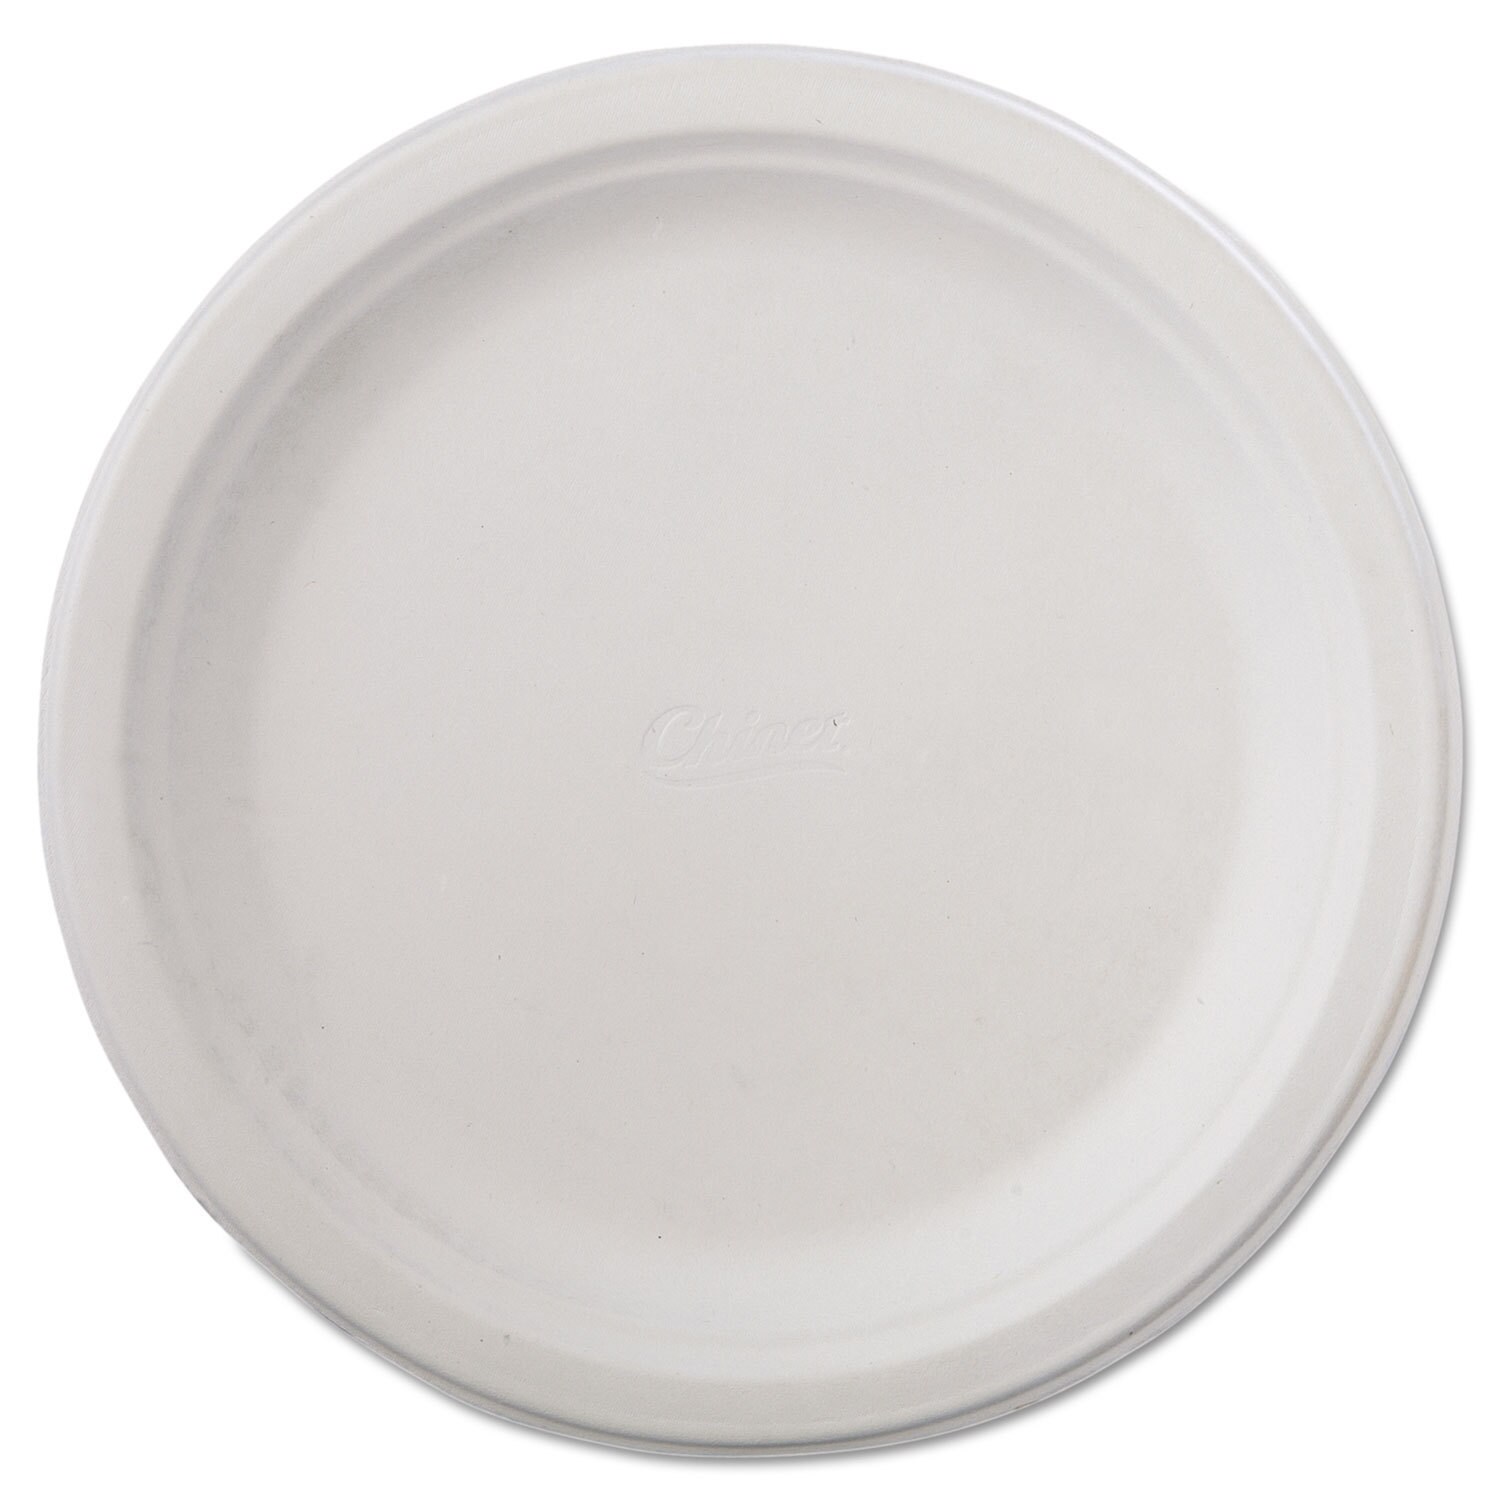 4 inch paper plates